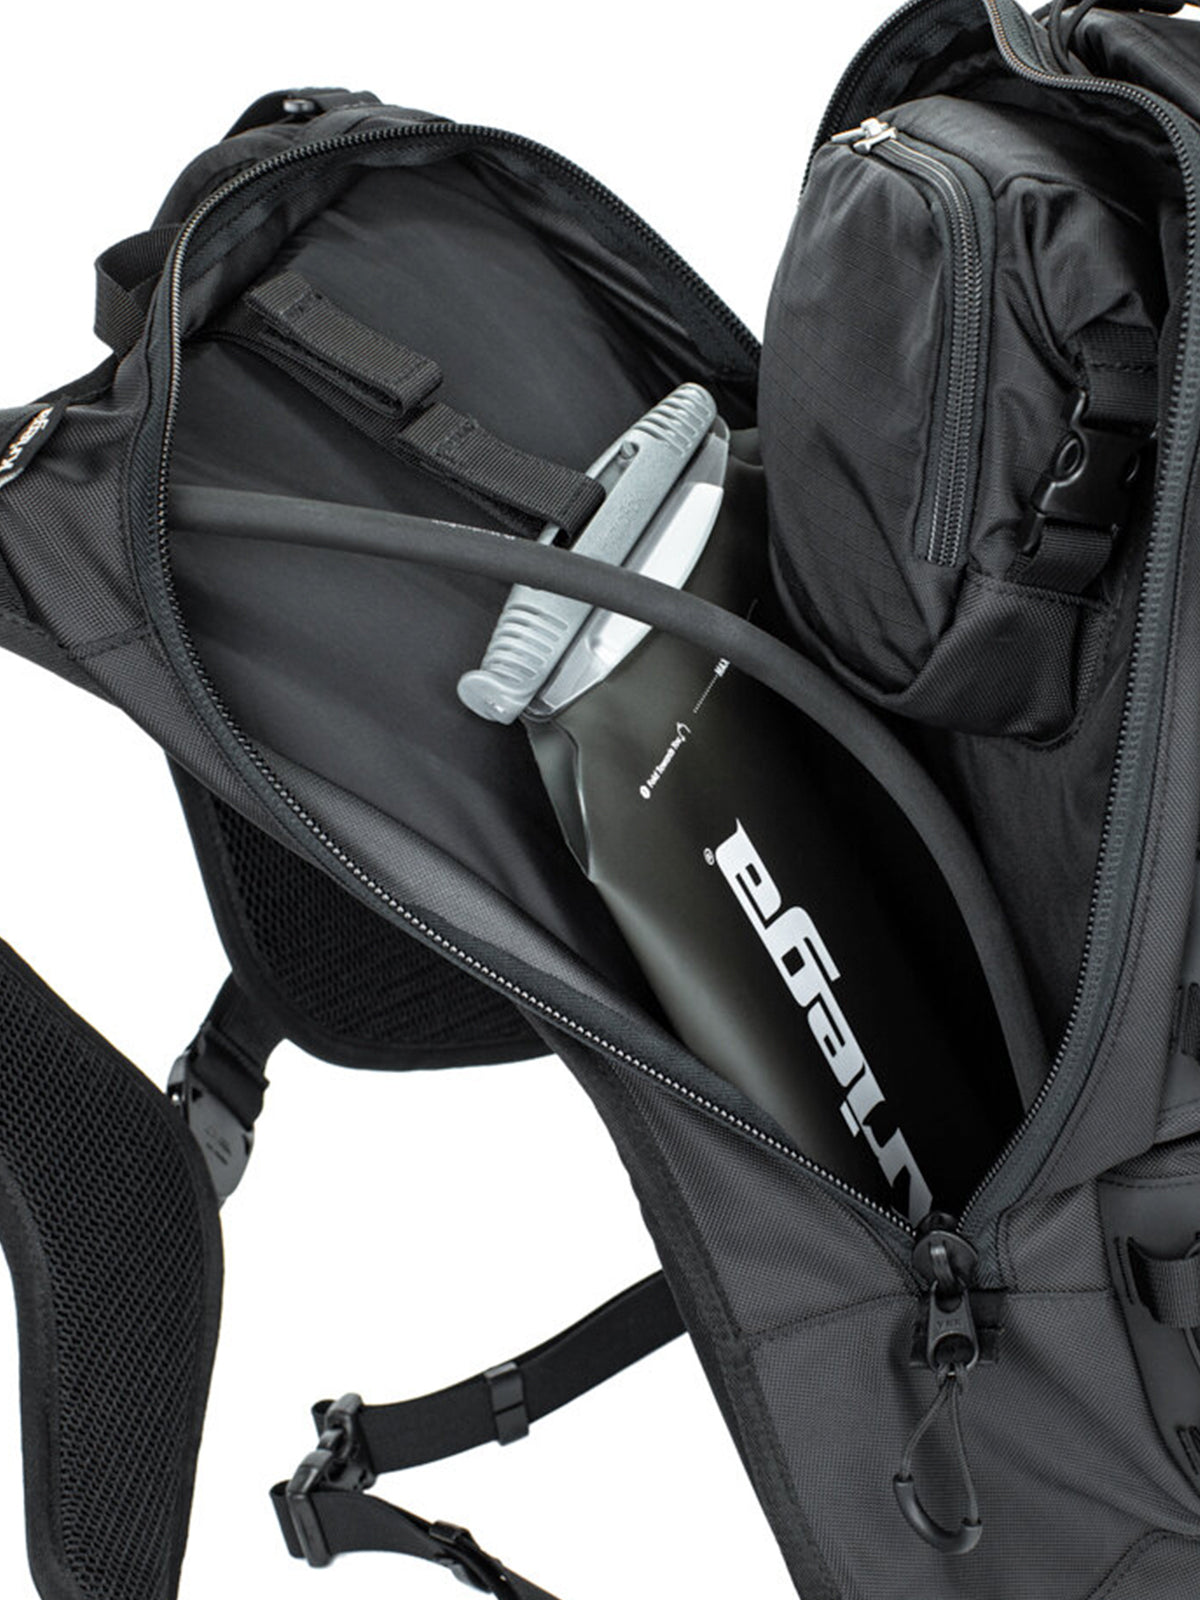 Kriega Trail18 Adventure Backpack with hydration reservoir